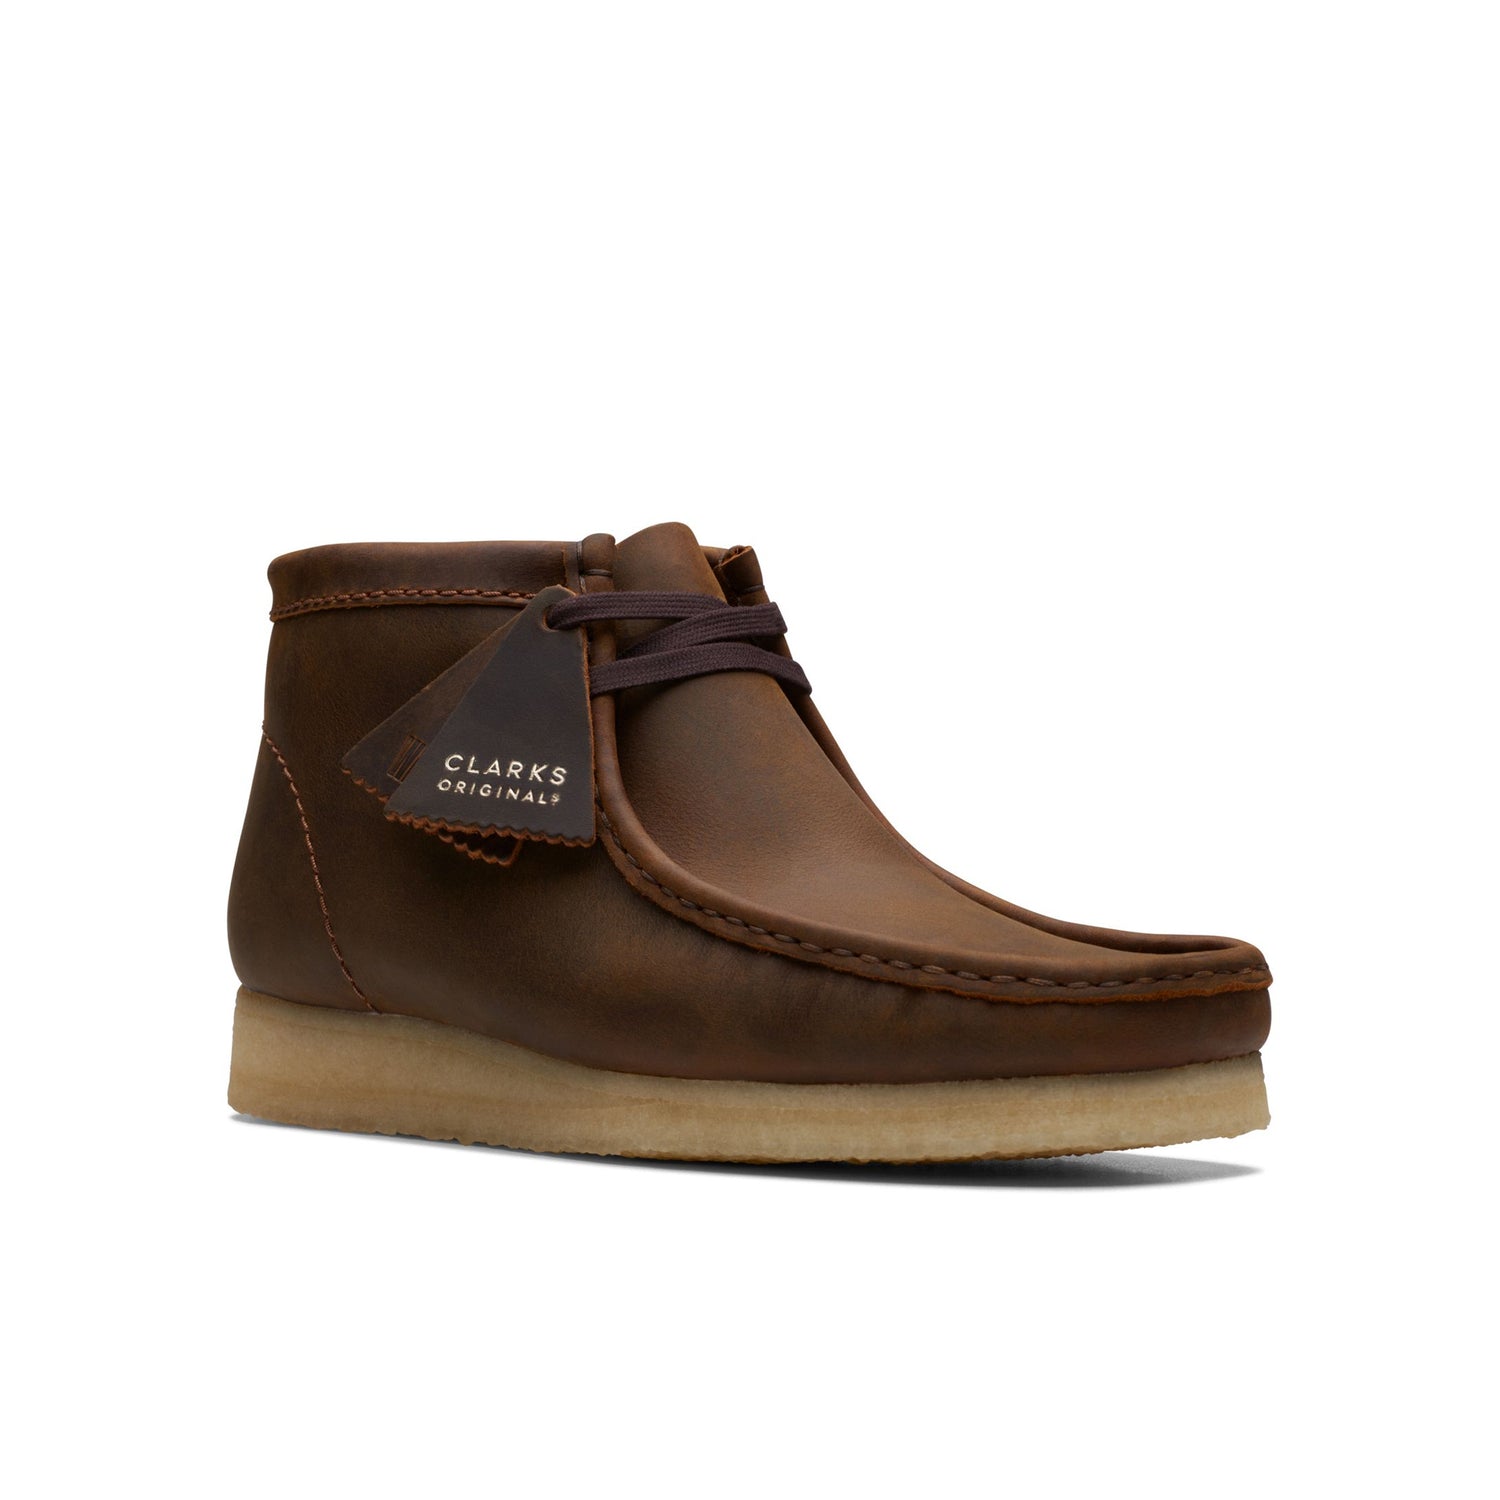 WALLABE BOOT BEESWAX